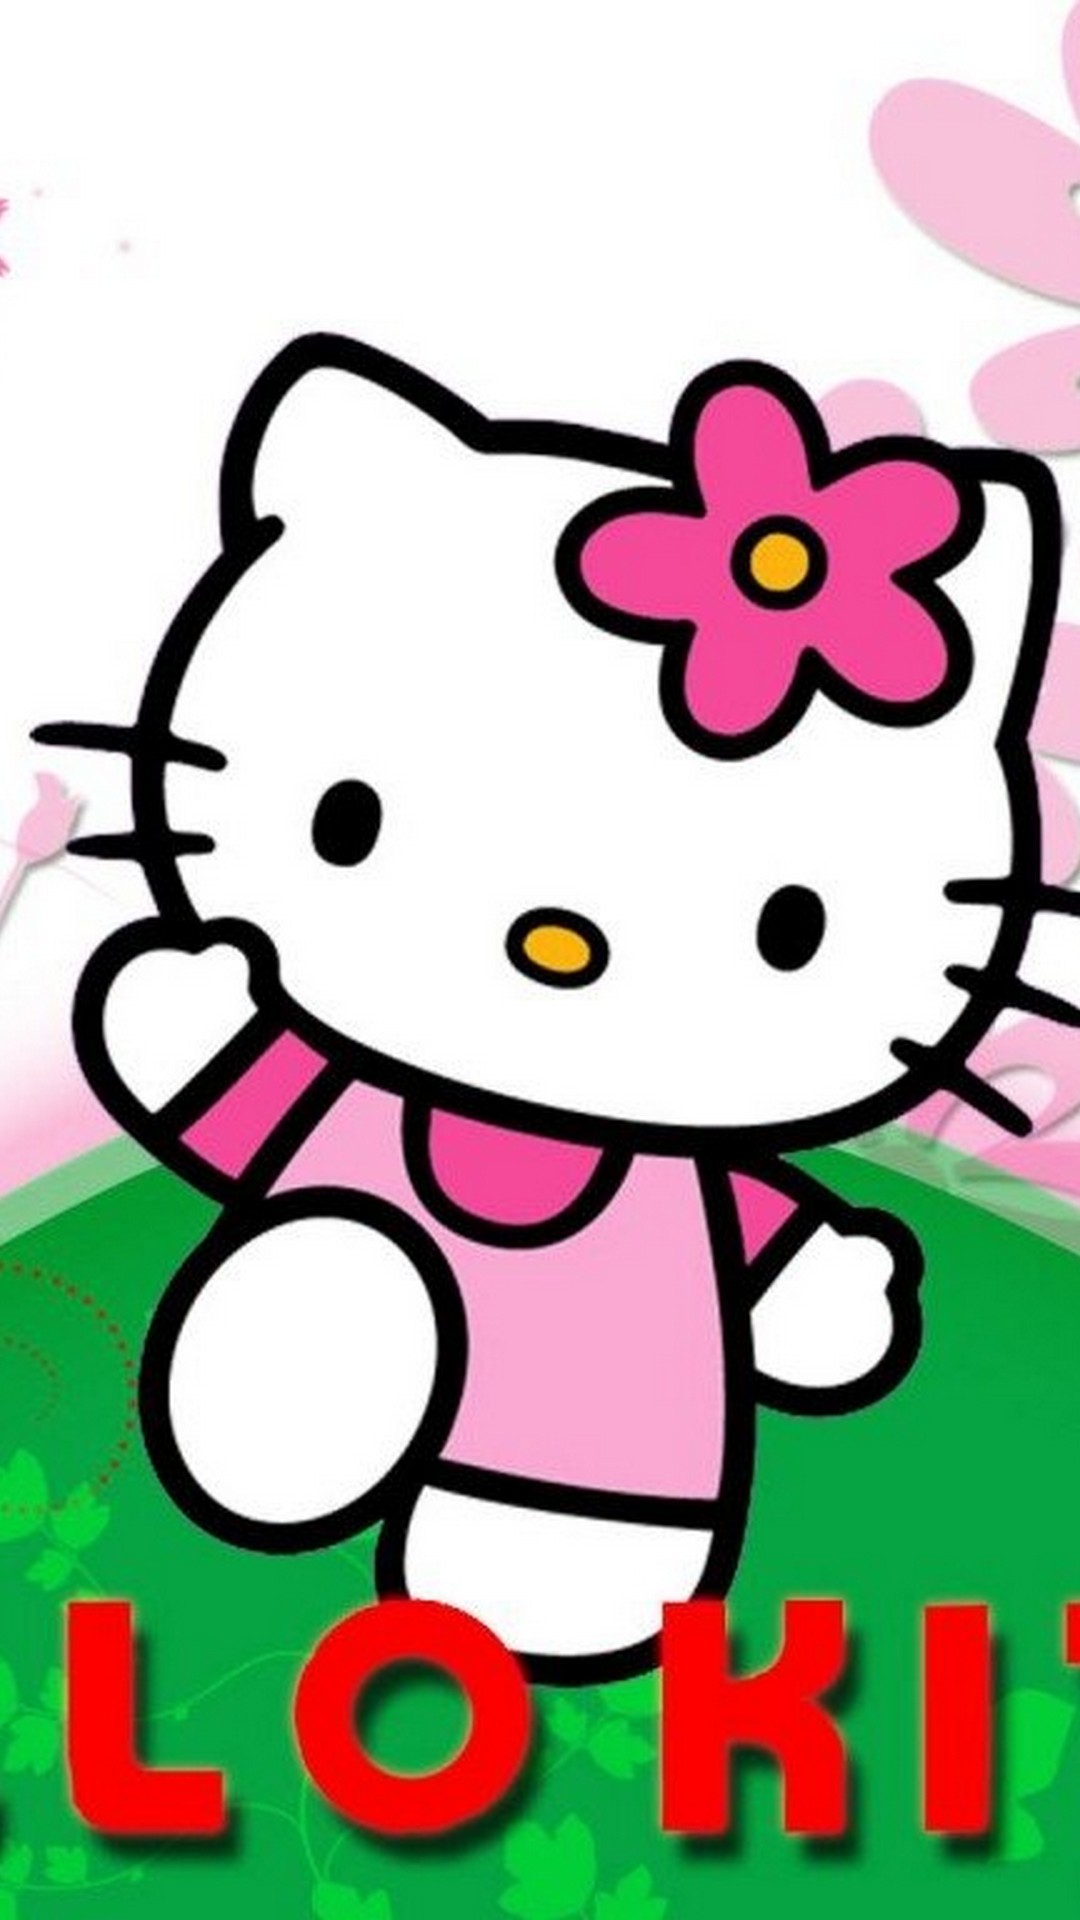 iPhone Wallpaper Hello Kitty Characters with image resolution 1080x1920 pixel. You can make this wallpaper for your iPhone 5, 6, 7, 8, X backgrounds, Mobile Screensaver, or iPad Lock Screen